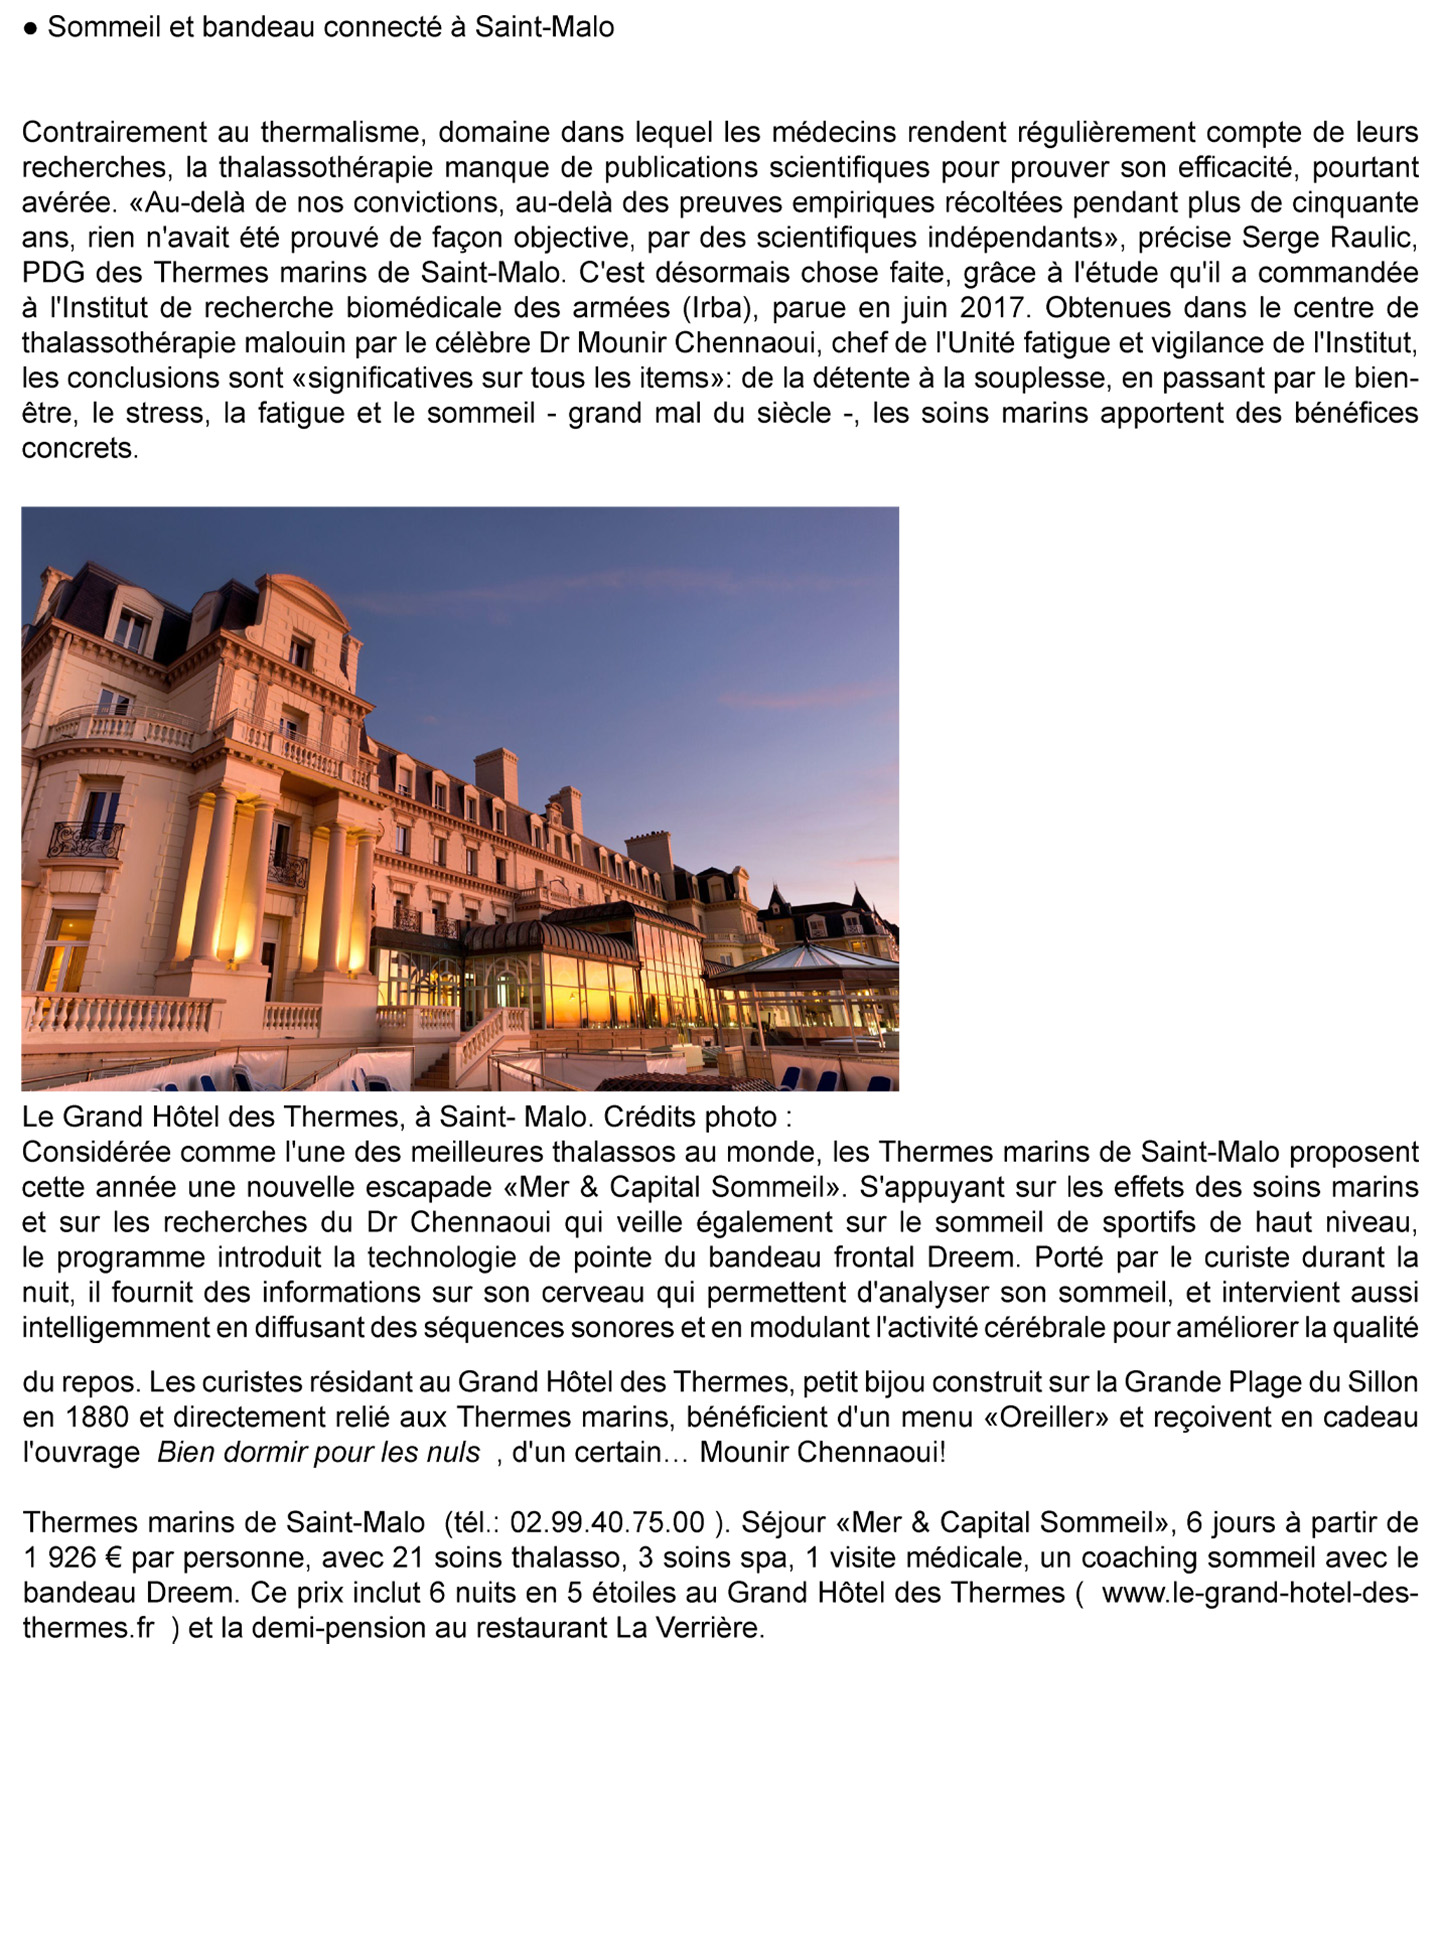 Article on the Trouville marine cures realized by the jean-Philippe Nuel studio in the magazine Le Figaro, new luxury spa hotel, luxury interior design